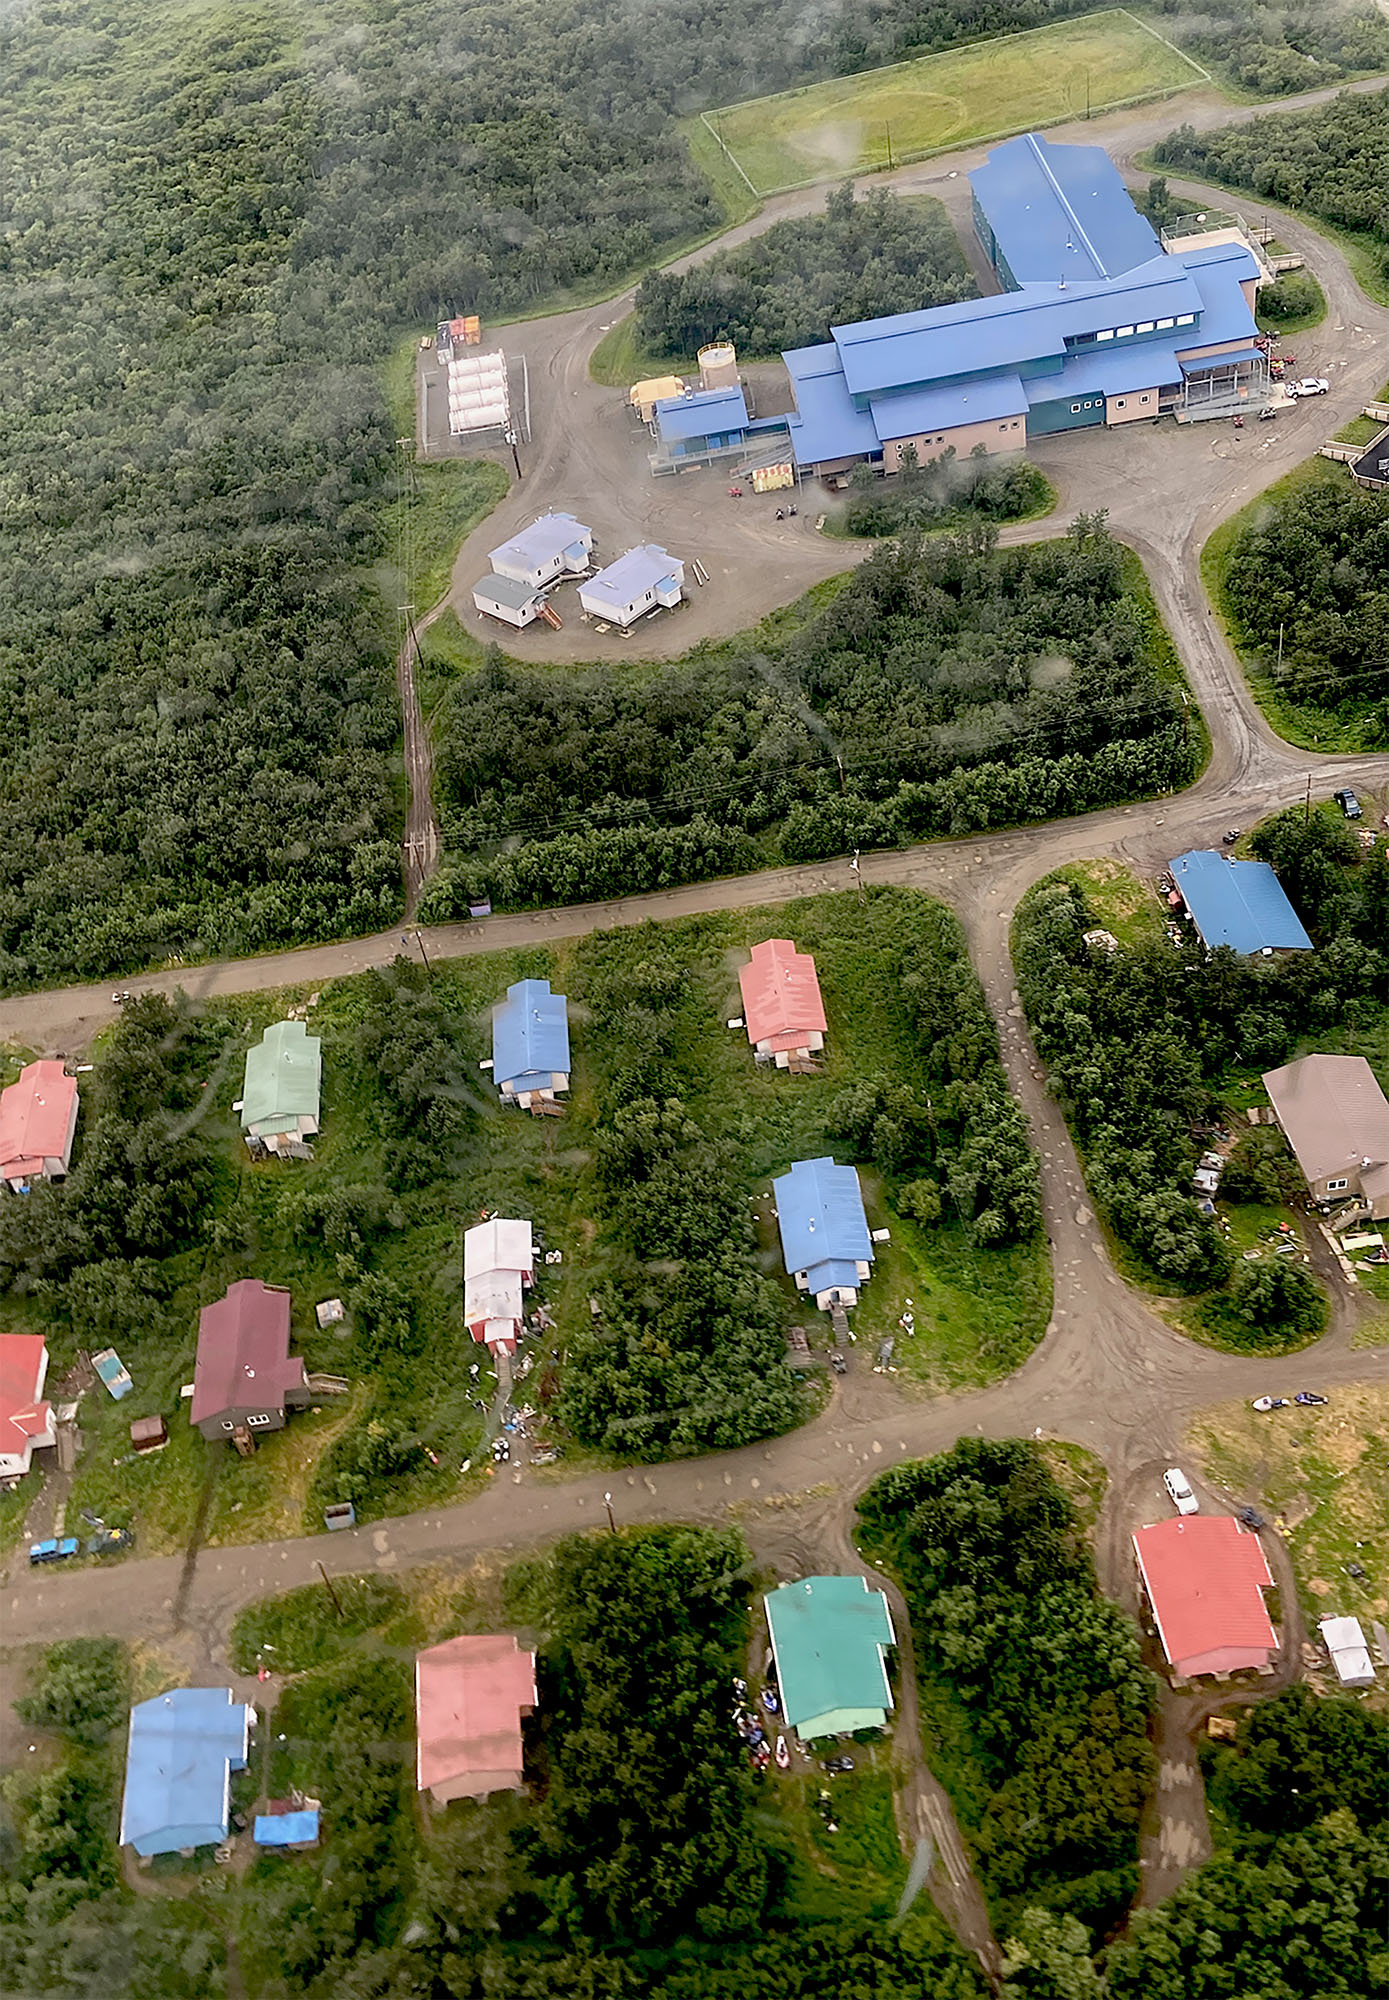 View of Kwethluk school from the air